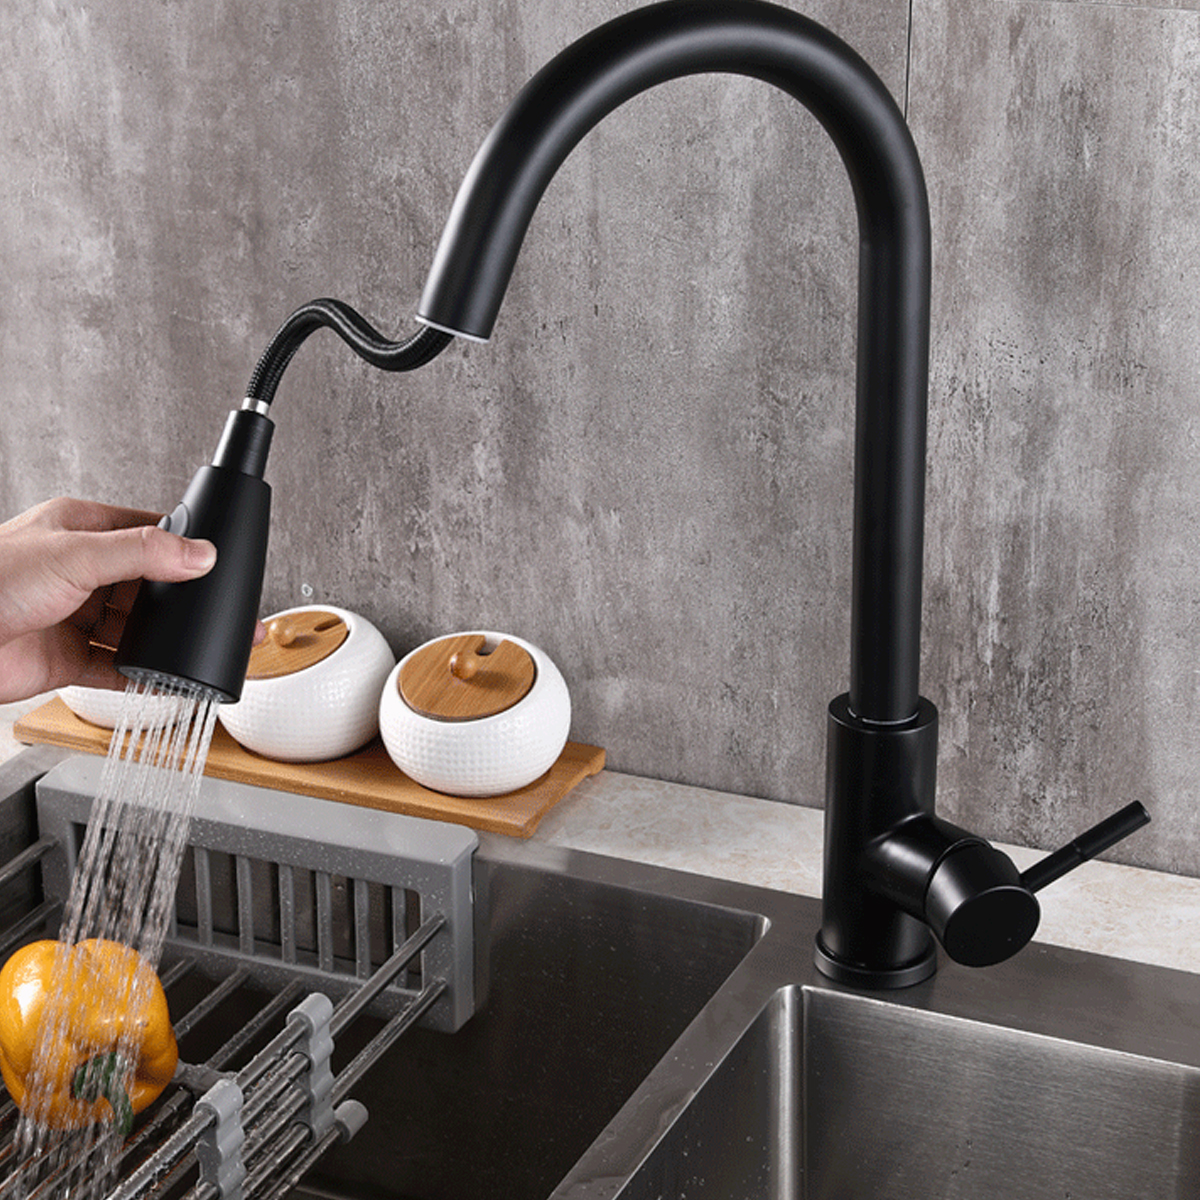 Kitchen Faucet Pull Down Kitchen Faucets Stainless Steel Kitchen Faucet with Pull Down Sprayer Modern Single Handle Kitchen Bar Faucet Mixer Tap - image 2 of 10